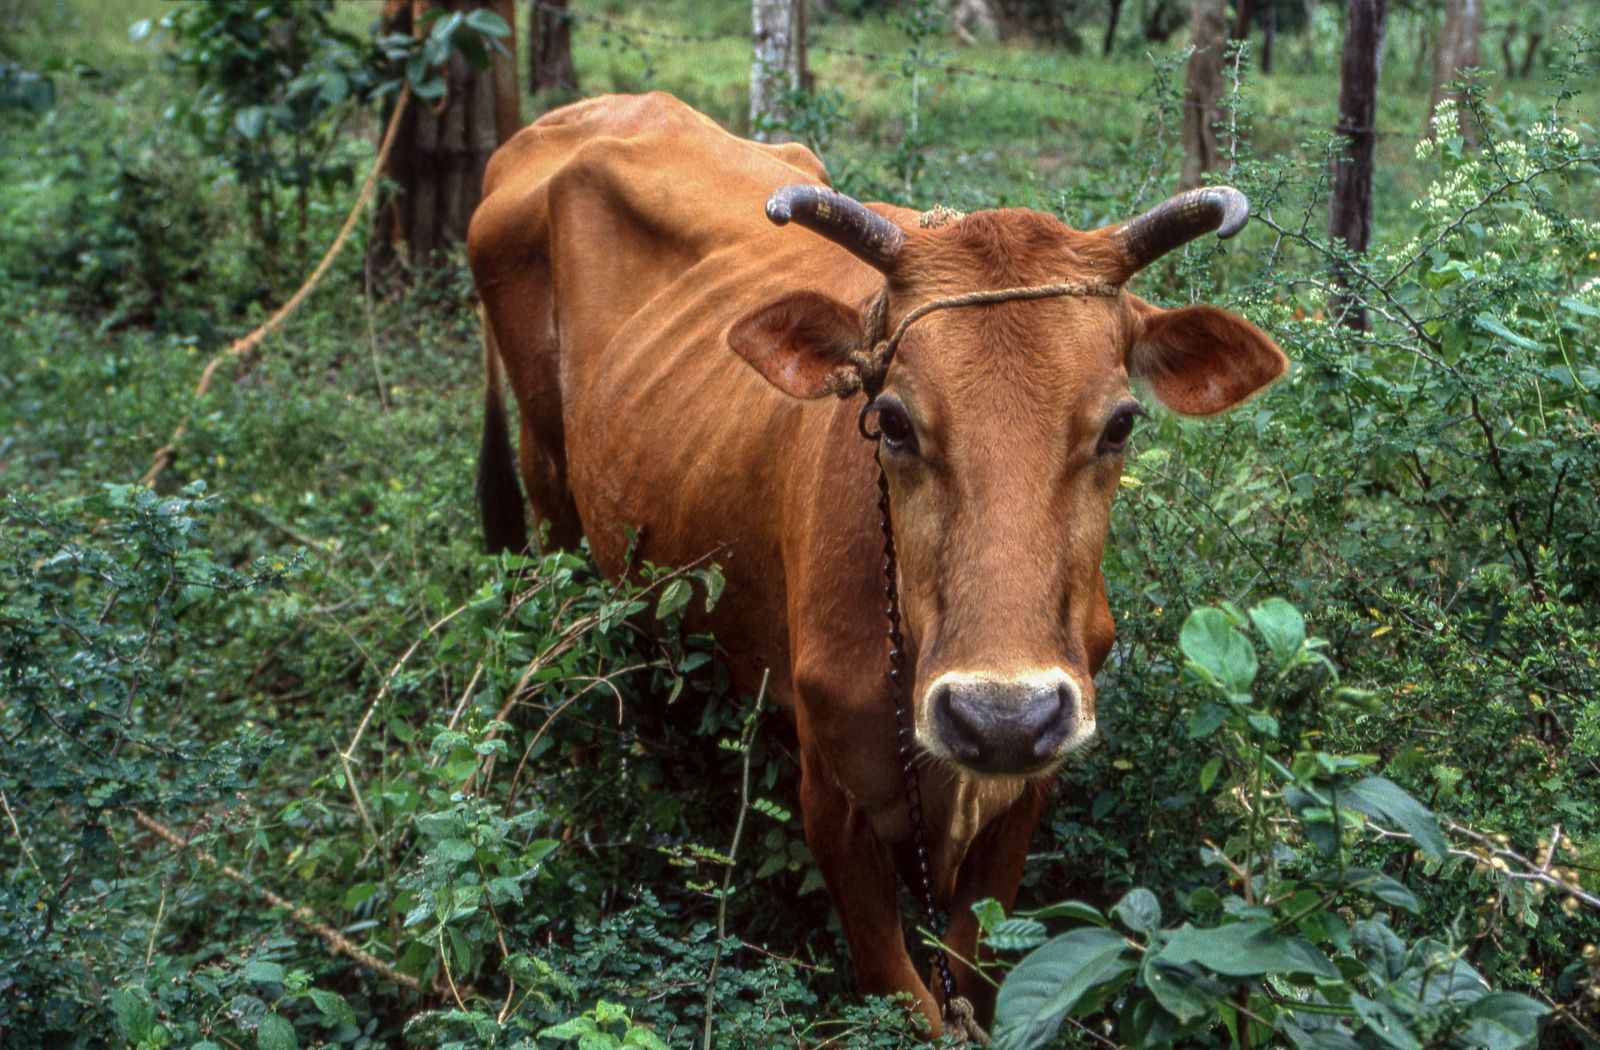 © Steven Edson - Cow tied to a tree in the jungle. Jamaica